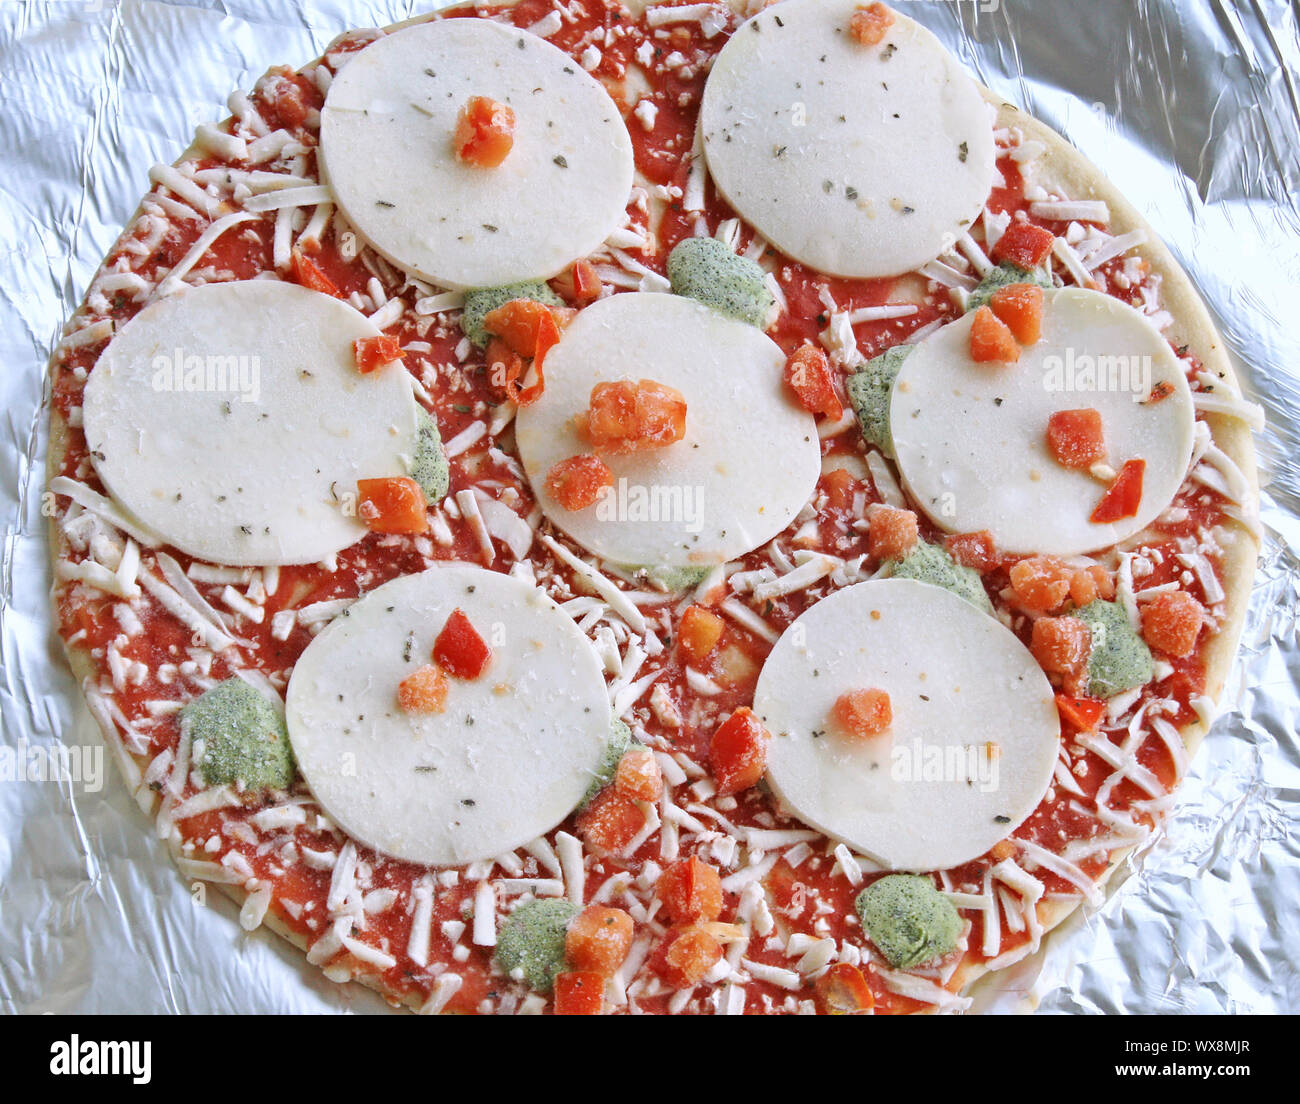 Frozen thin crust pizza with mozzarella cheese and veggies on aluminum foil ready for cooking Stock Photo